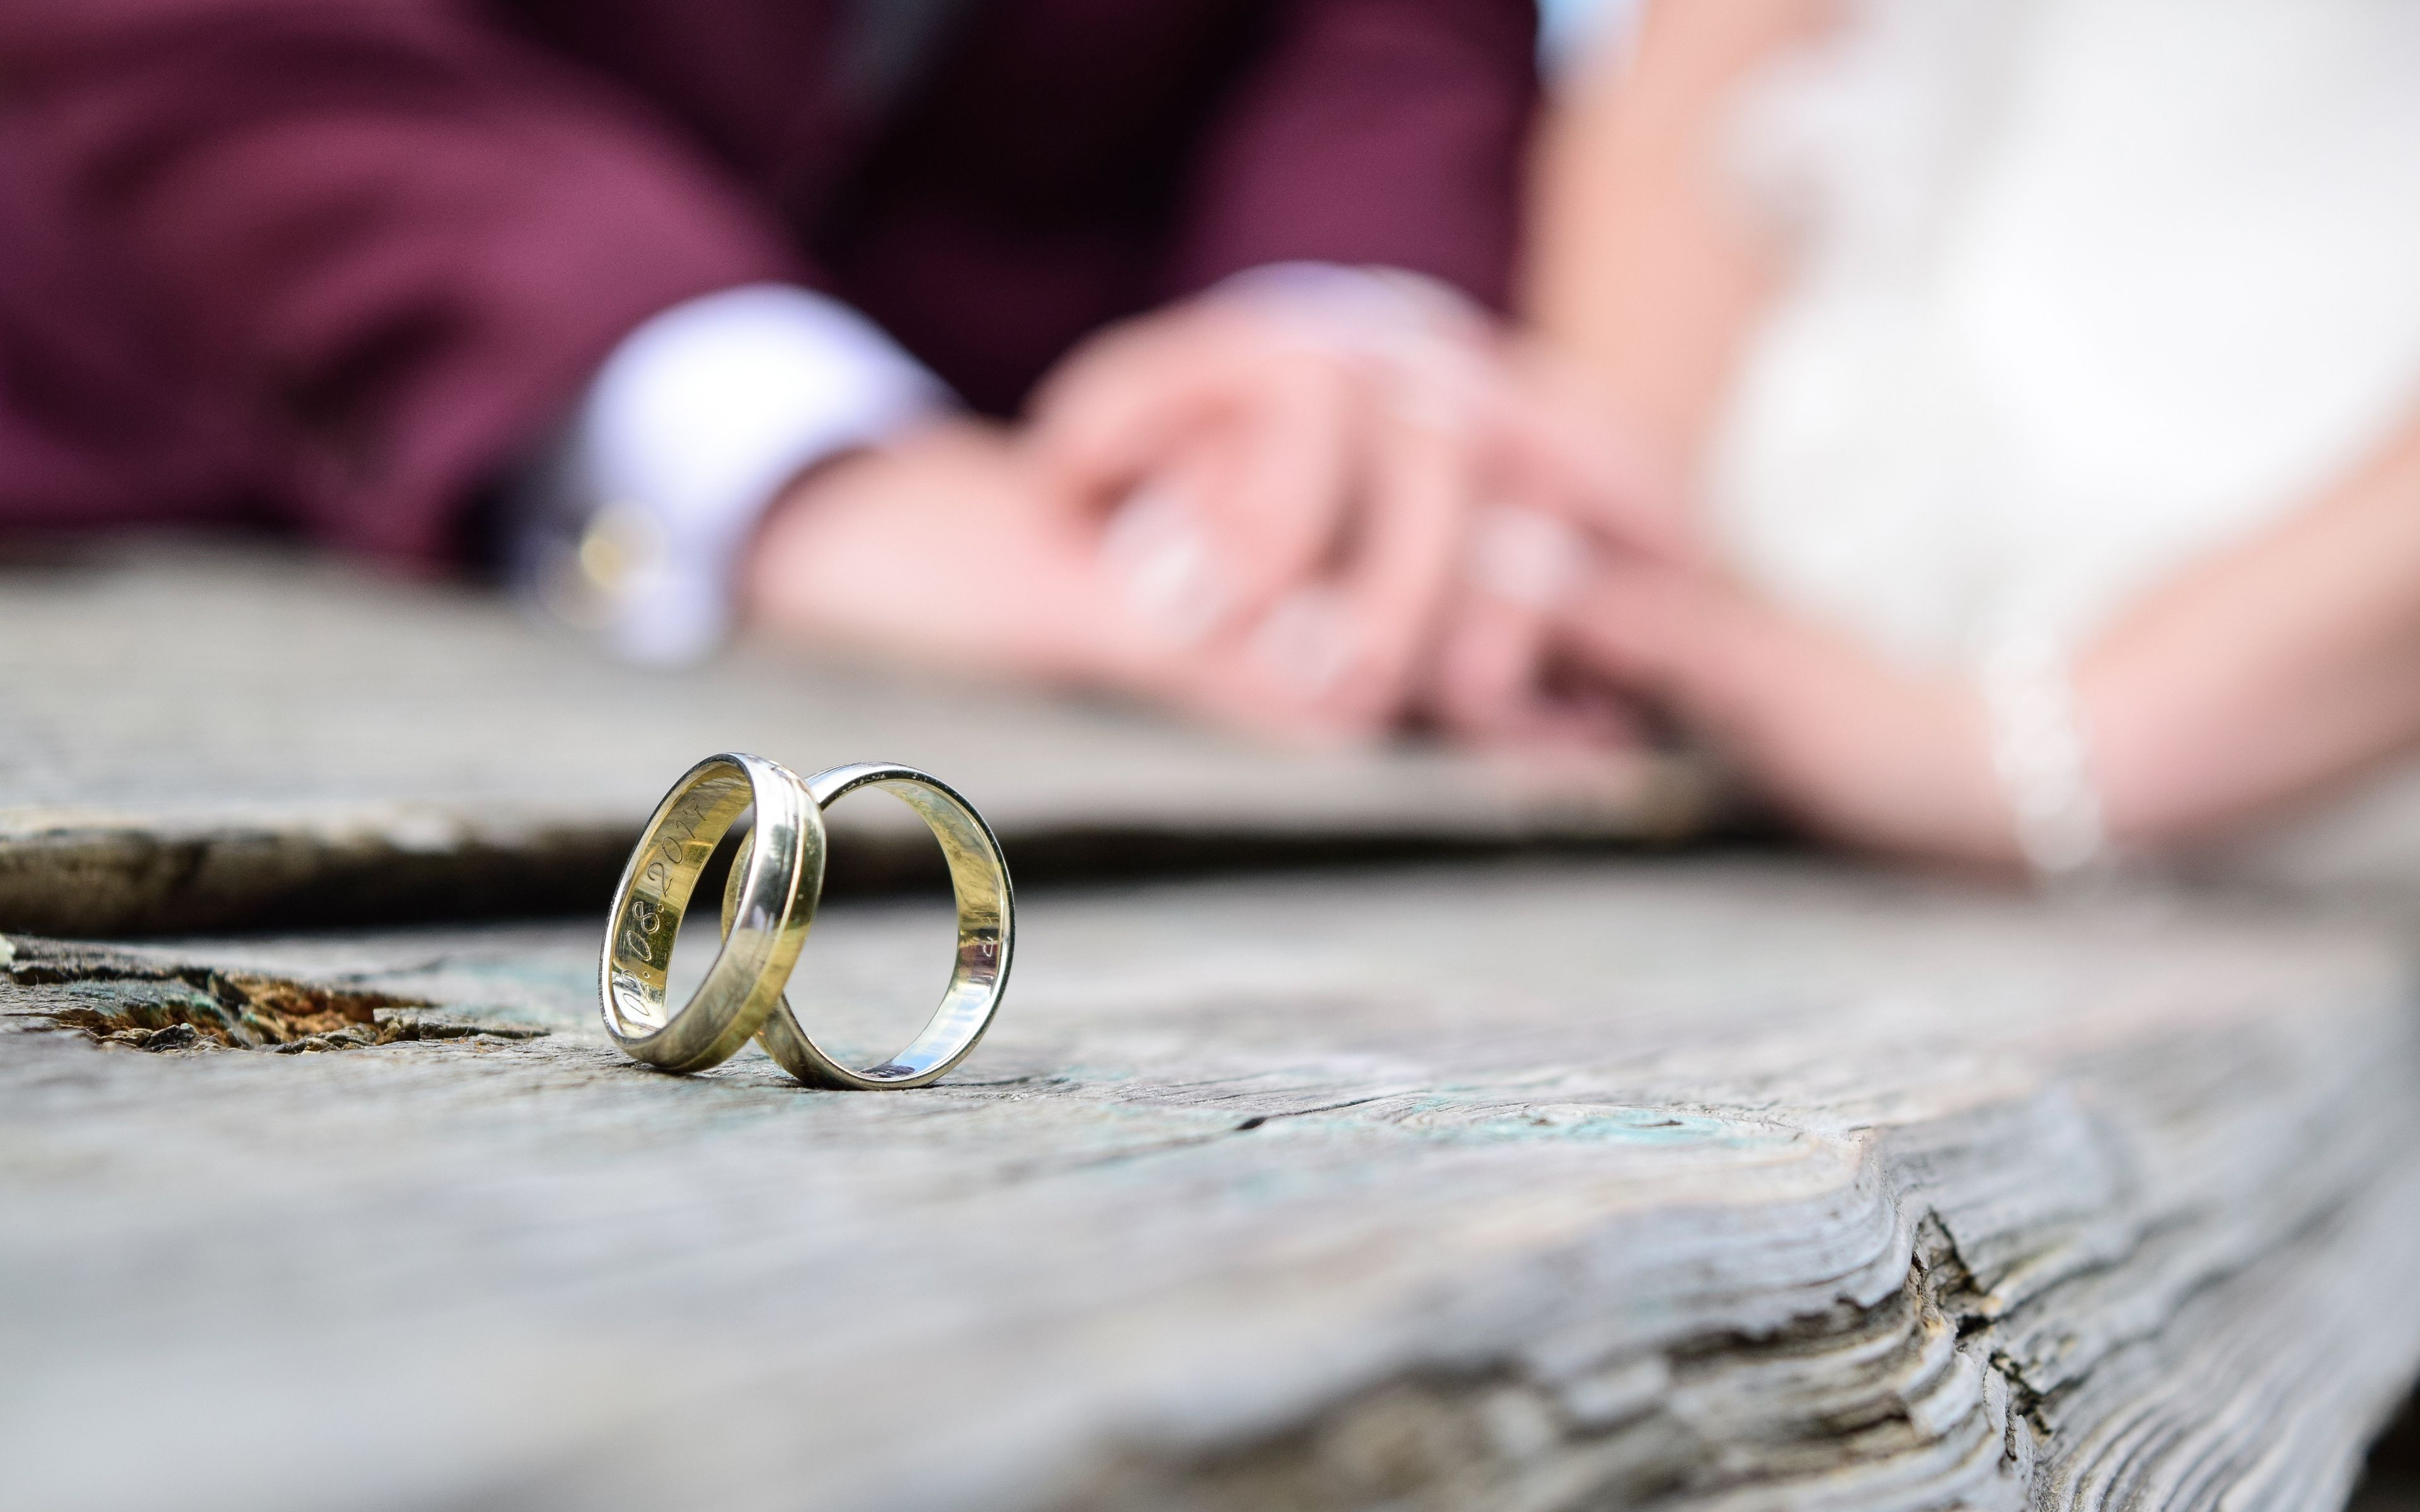 Download Wallpaper Wedding Rings, 4k, Jewellery, Close Up, Love Concept, Wedding Moments, Wedding Moments Couple For Desktop With Resolution 3840x2400. High Quality HD Picture Wallpaper